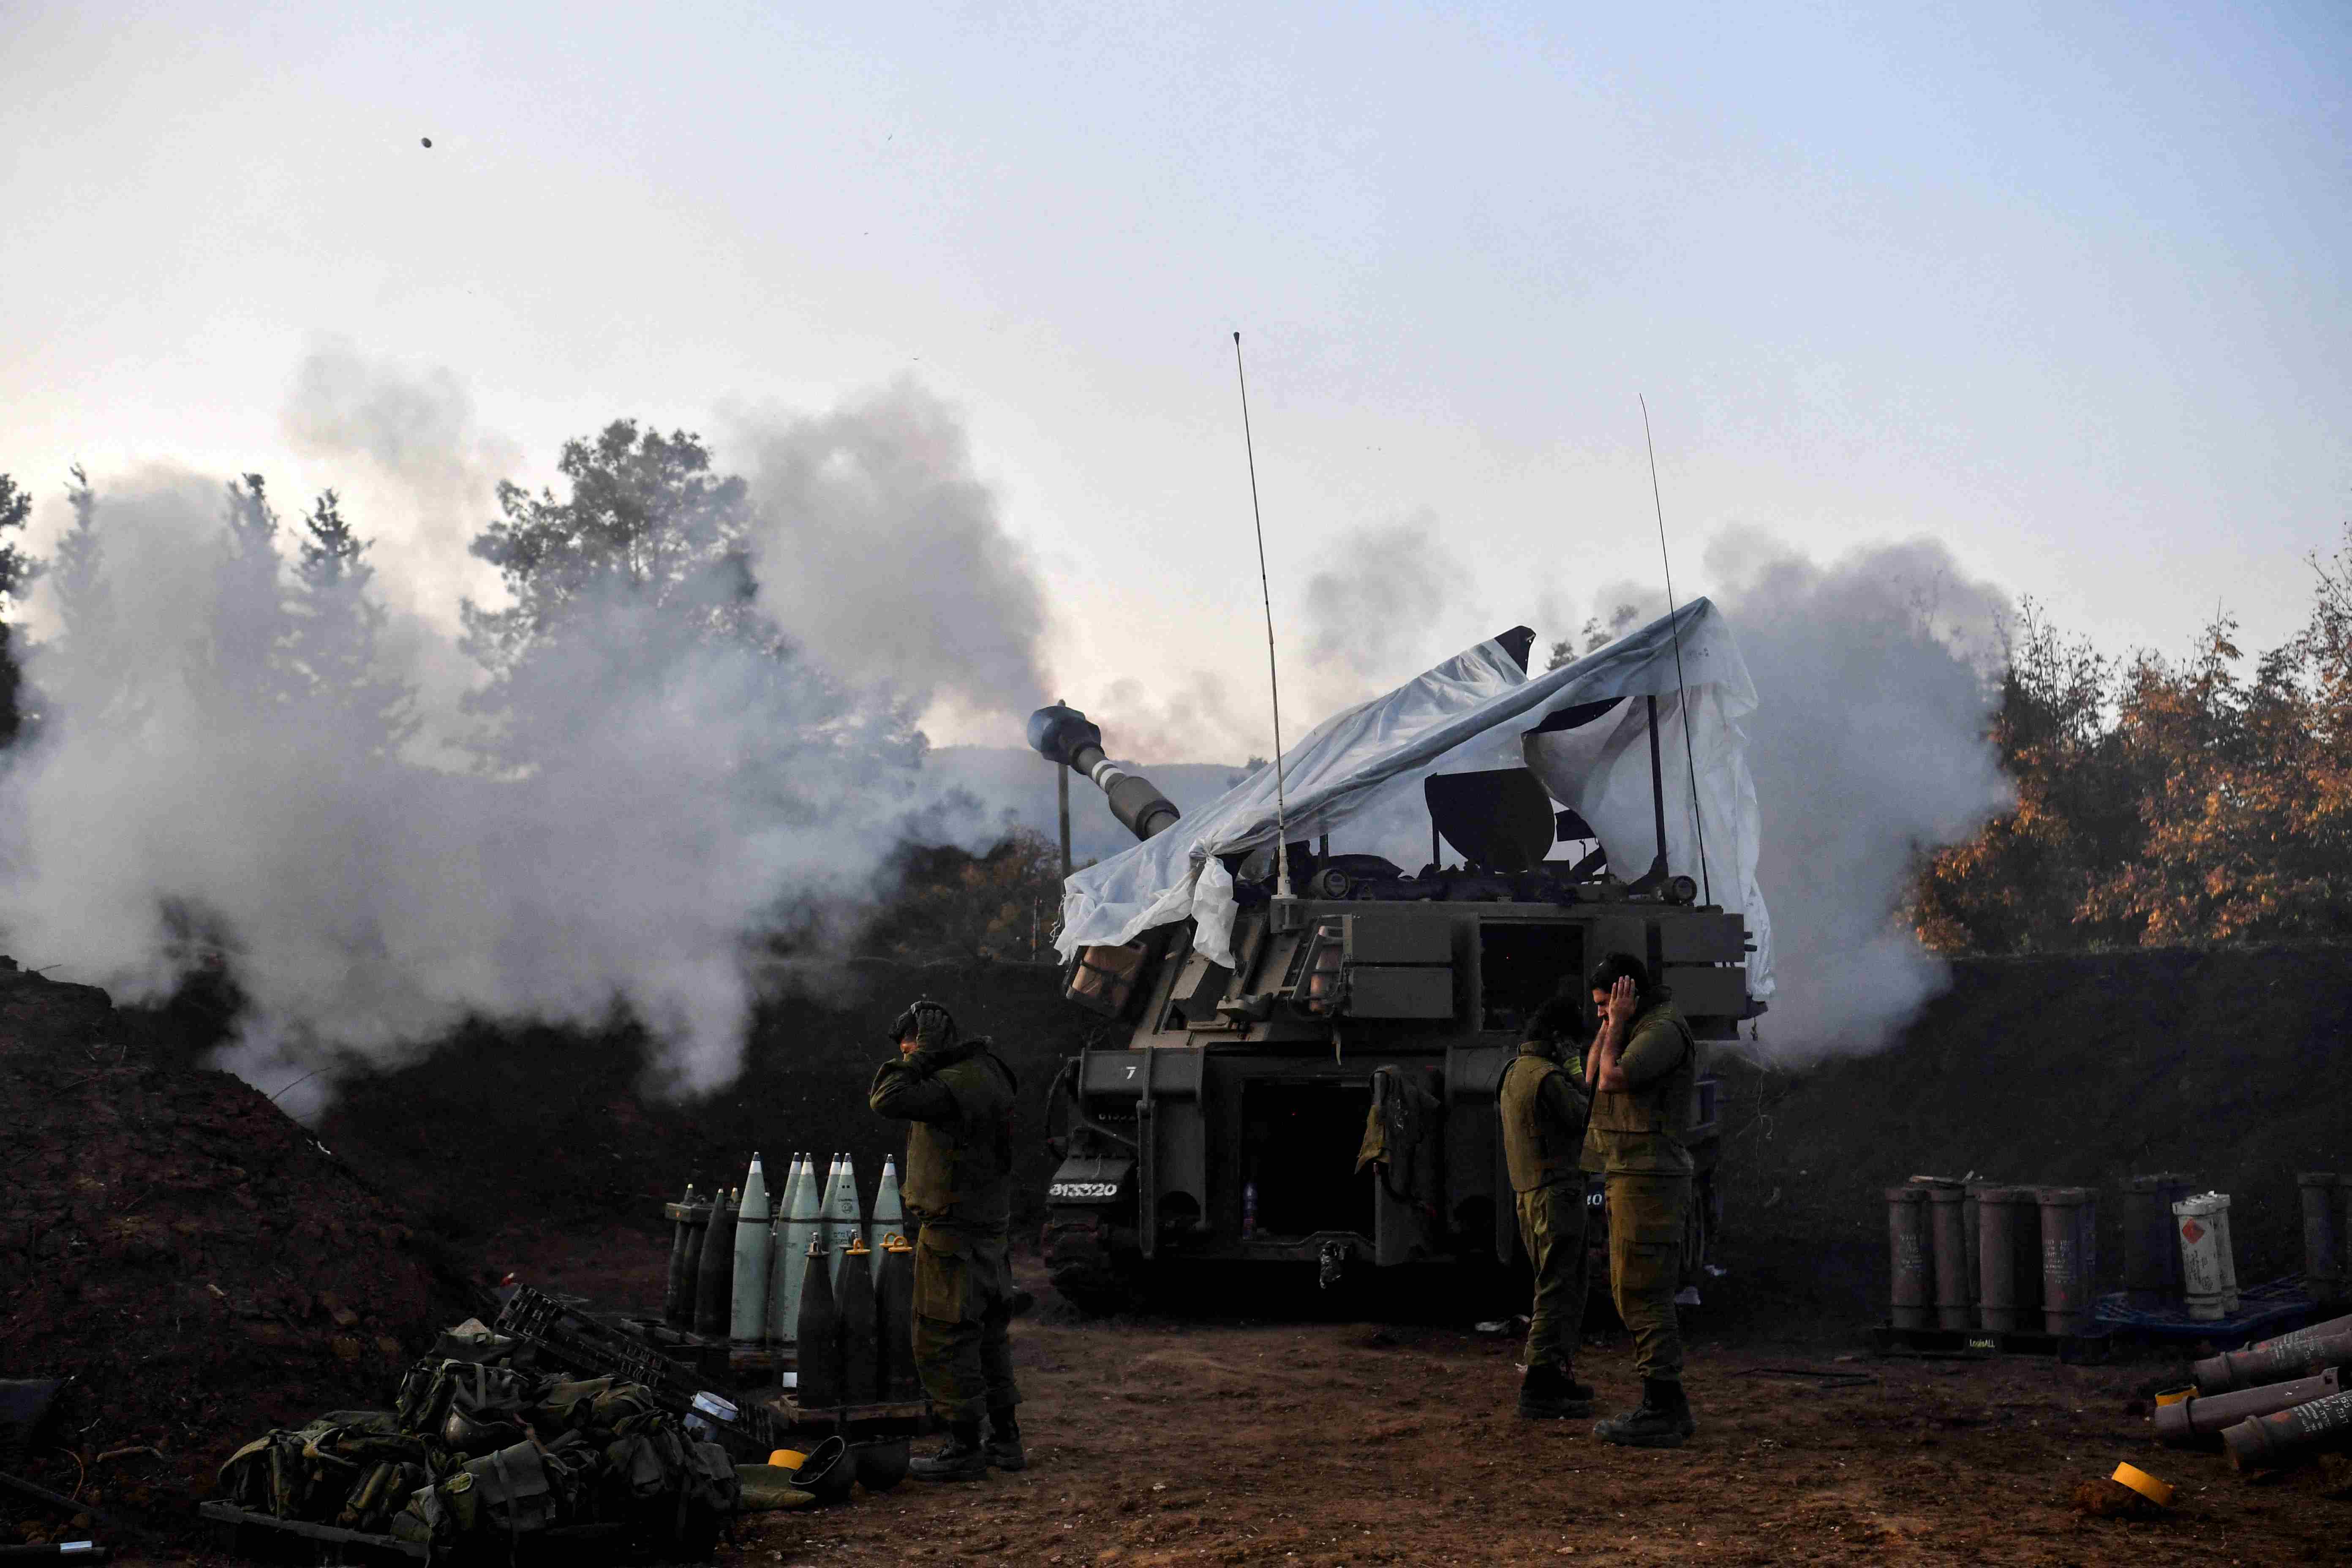 Israeli soldiers stand by, as a mobile artillery unit fires, on the Israeli side of the Israel-Lebanon border, REUTERS.